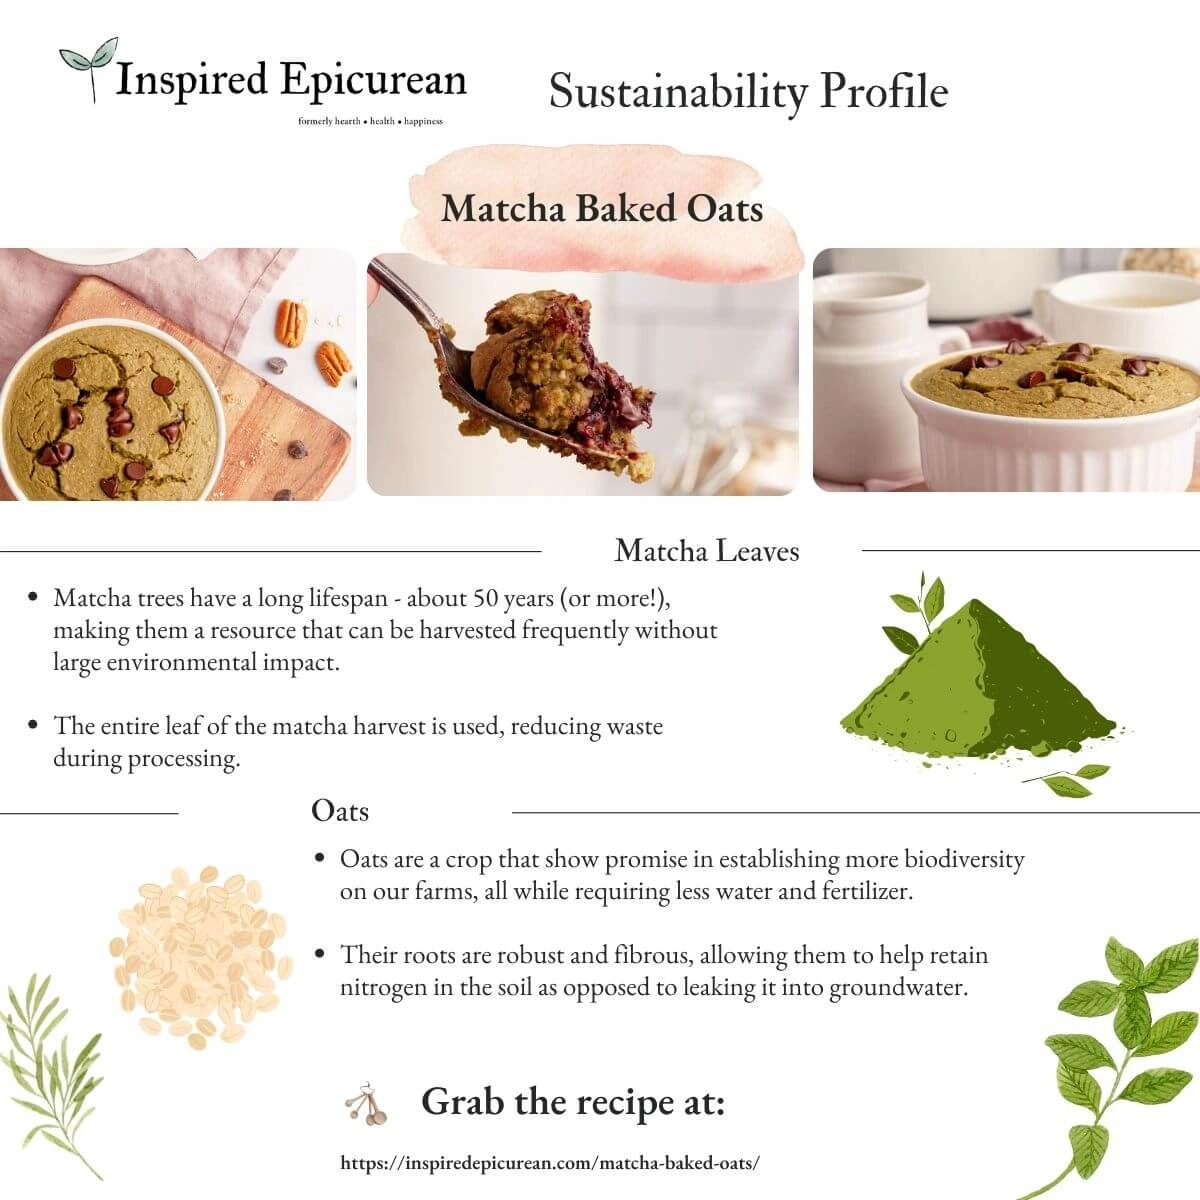 facts about the sustainability of matcha baked oats